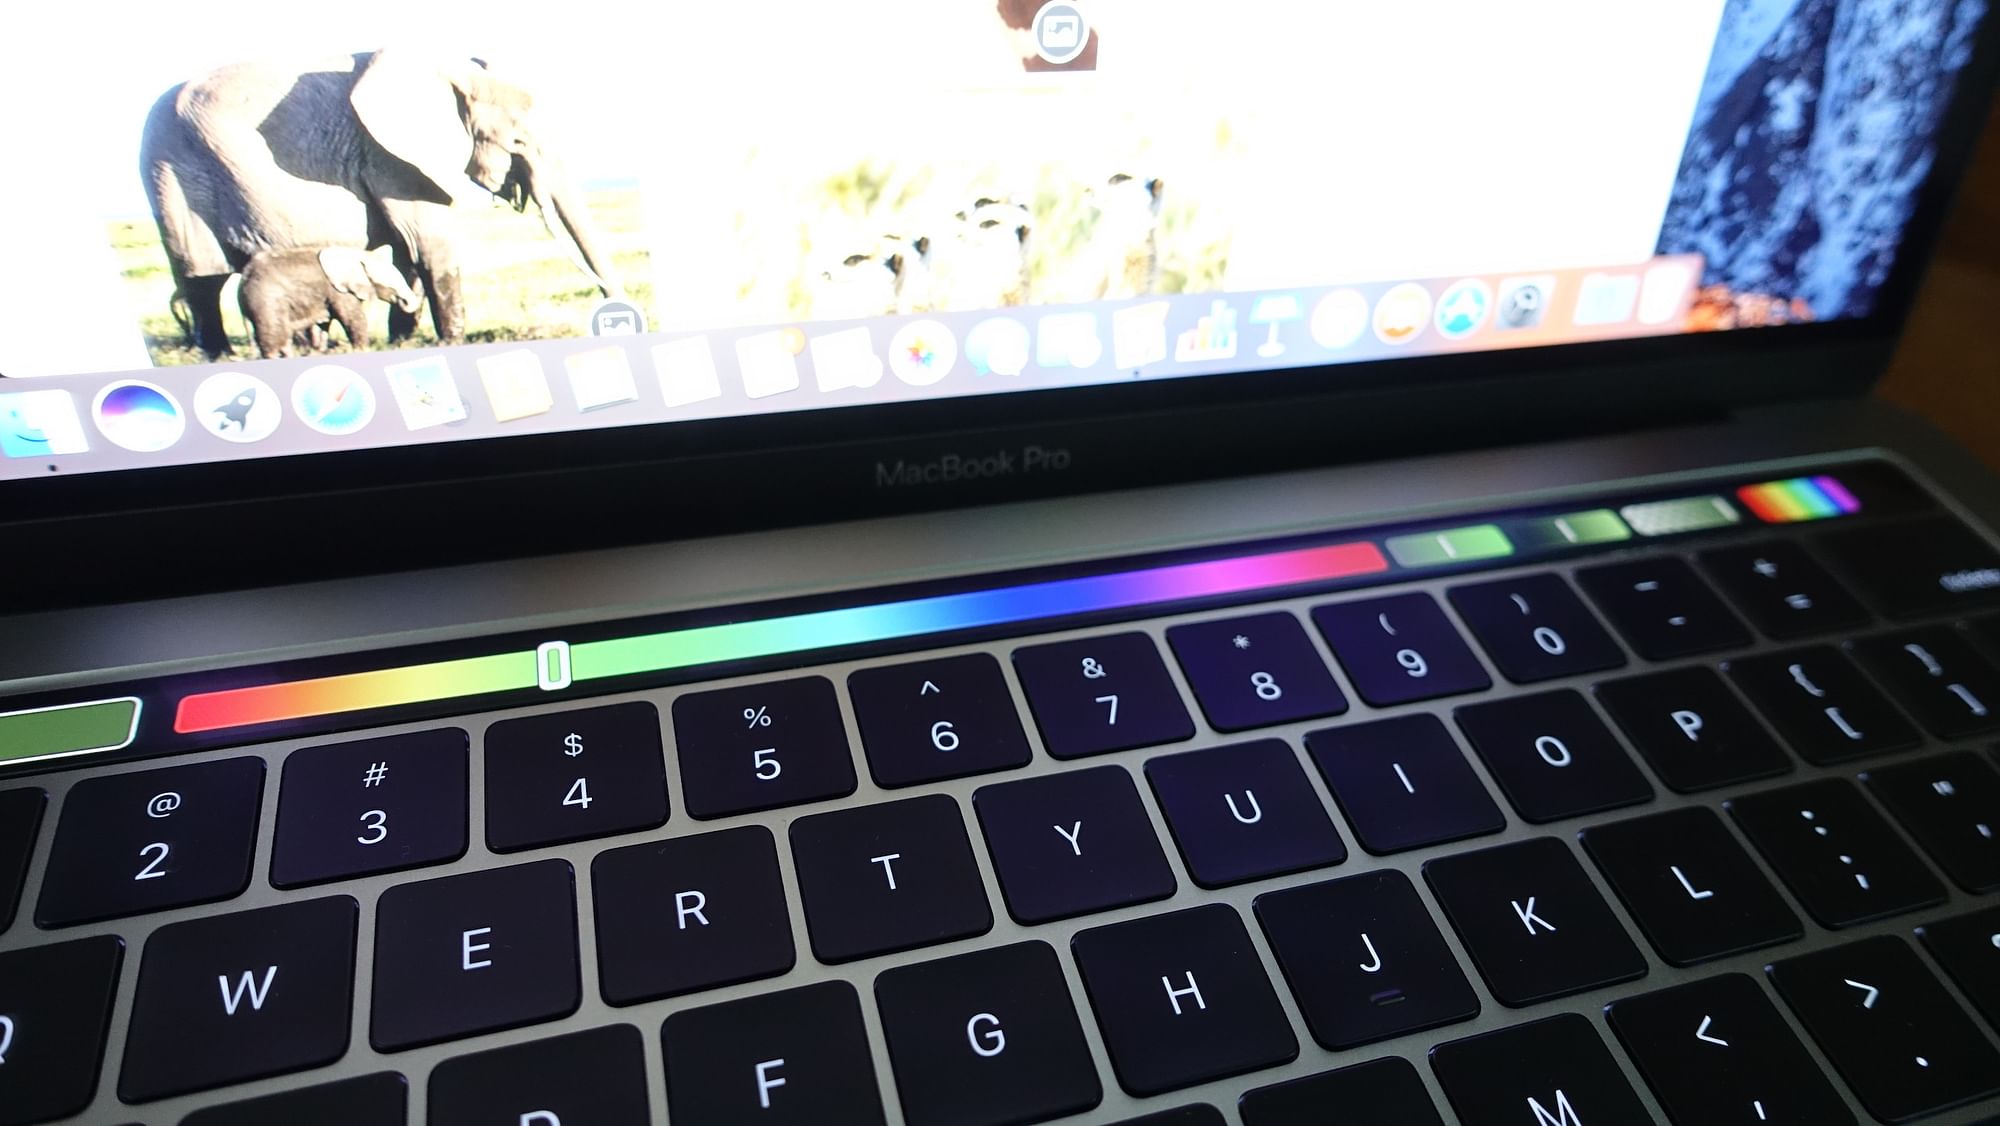 Apple’s 2016 MacBook Pro comes with Touch Bar. (Photo: <b>The Quint</b>/@2<a href="https://twitter.com/2shar">shar</a>)